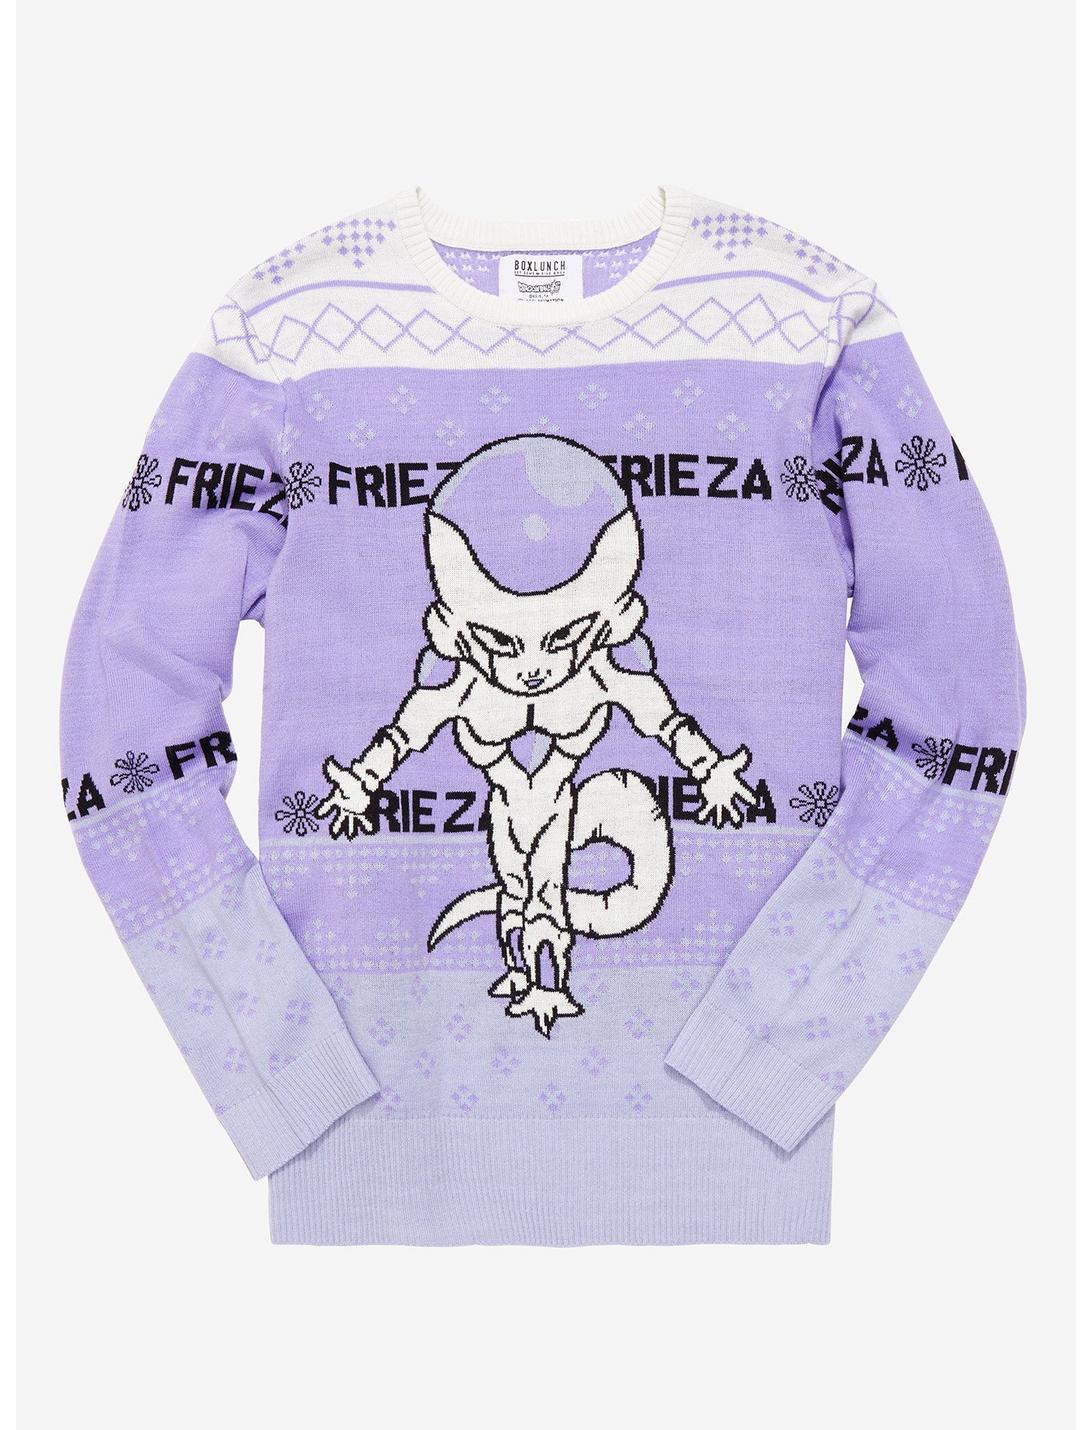 Dragon Ball Z Final Form Frieza Holiday Sweater - BoxLunch Exclusive, LILAC, hi-res